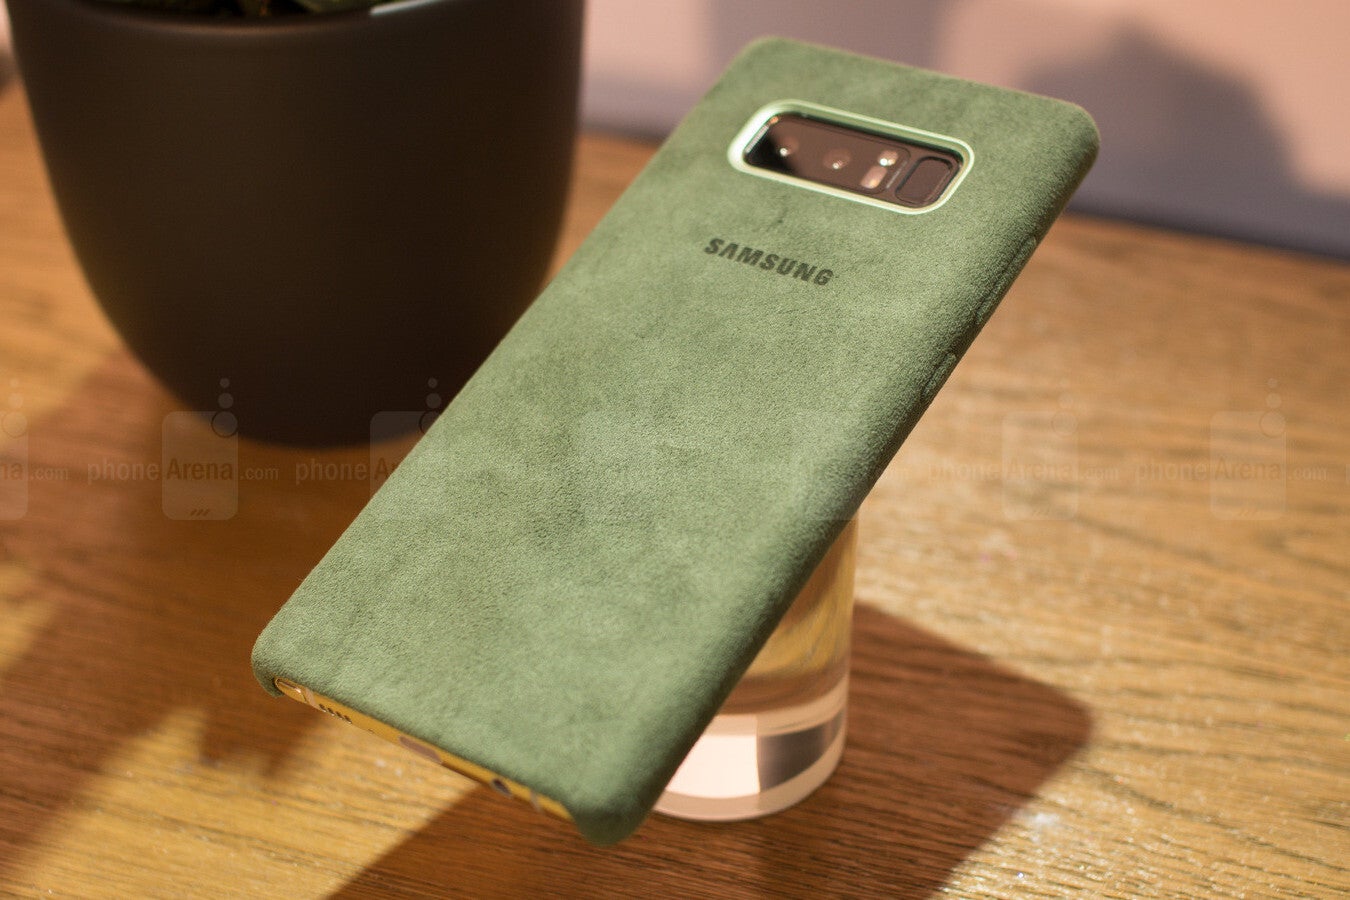 Samsung&#039;s official Alcantara case for the Galaxy Note 8 - We find US carrier S20 model cases in the FCC, exclusive Danish fabric for the Ultra